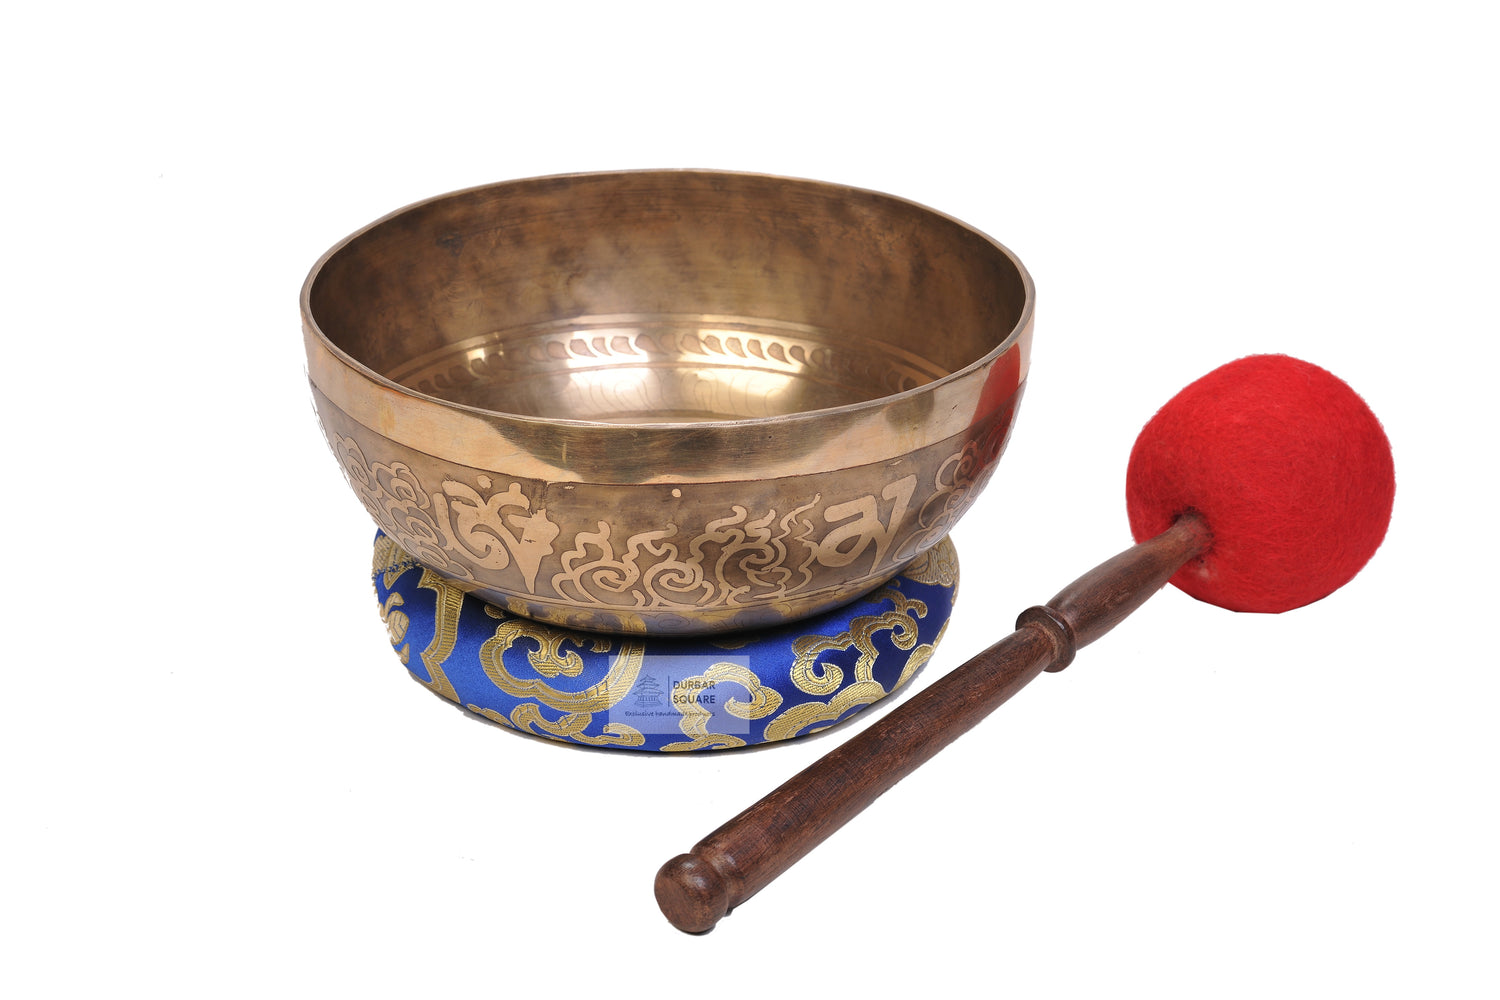 “Train the brain” with our handcrafted Singing Bowls & Bells